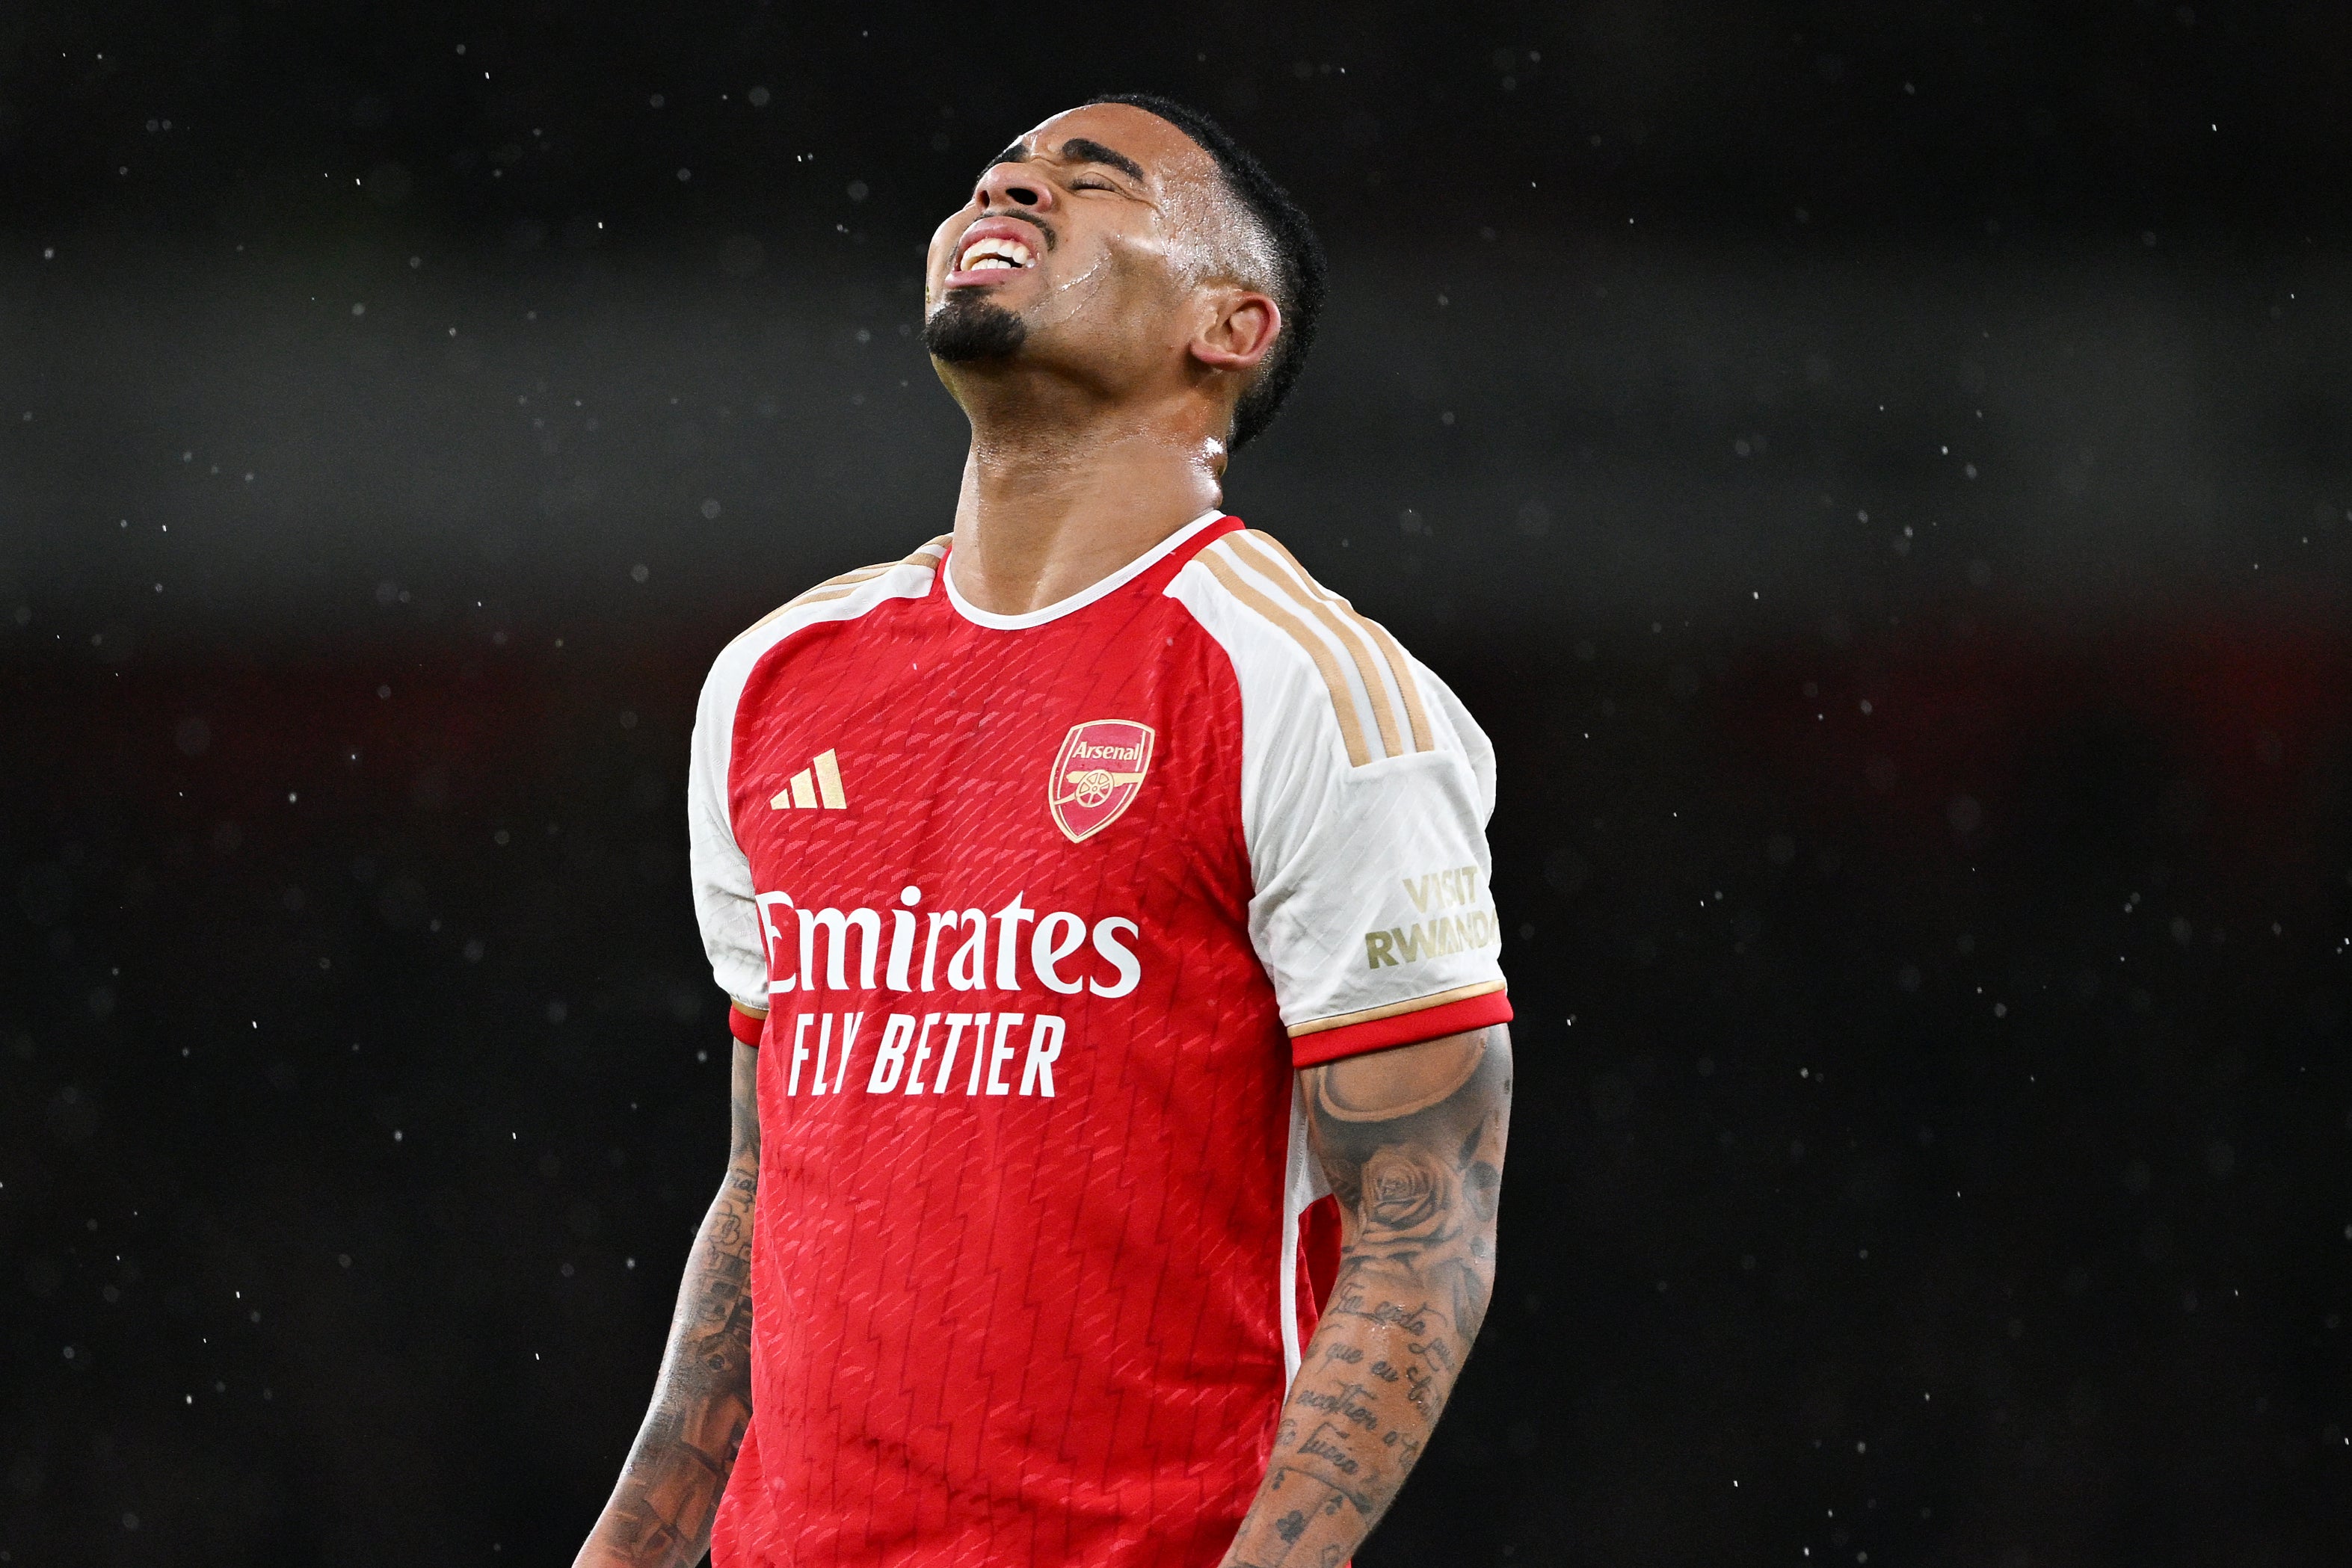 Gabriel Jesus missed a number of good chances for Arsenal